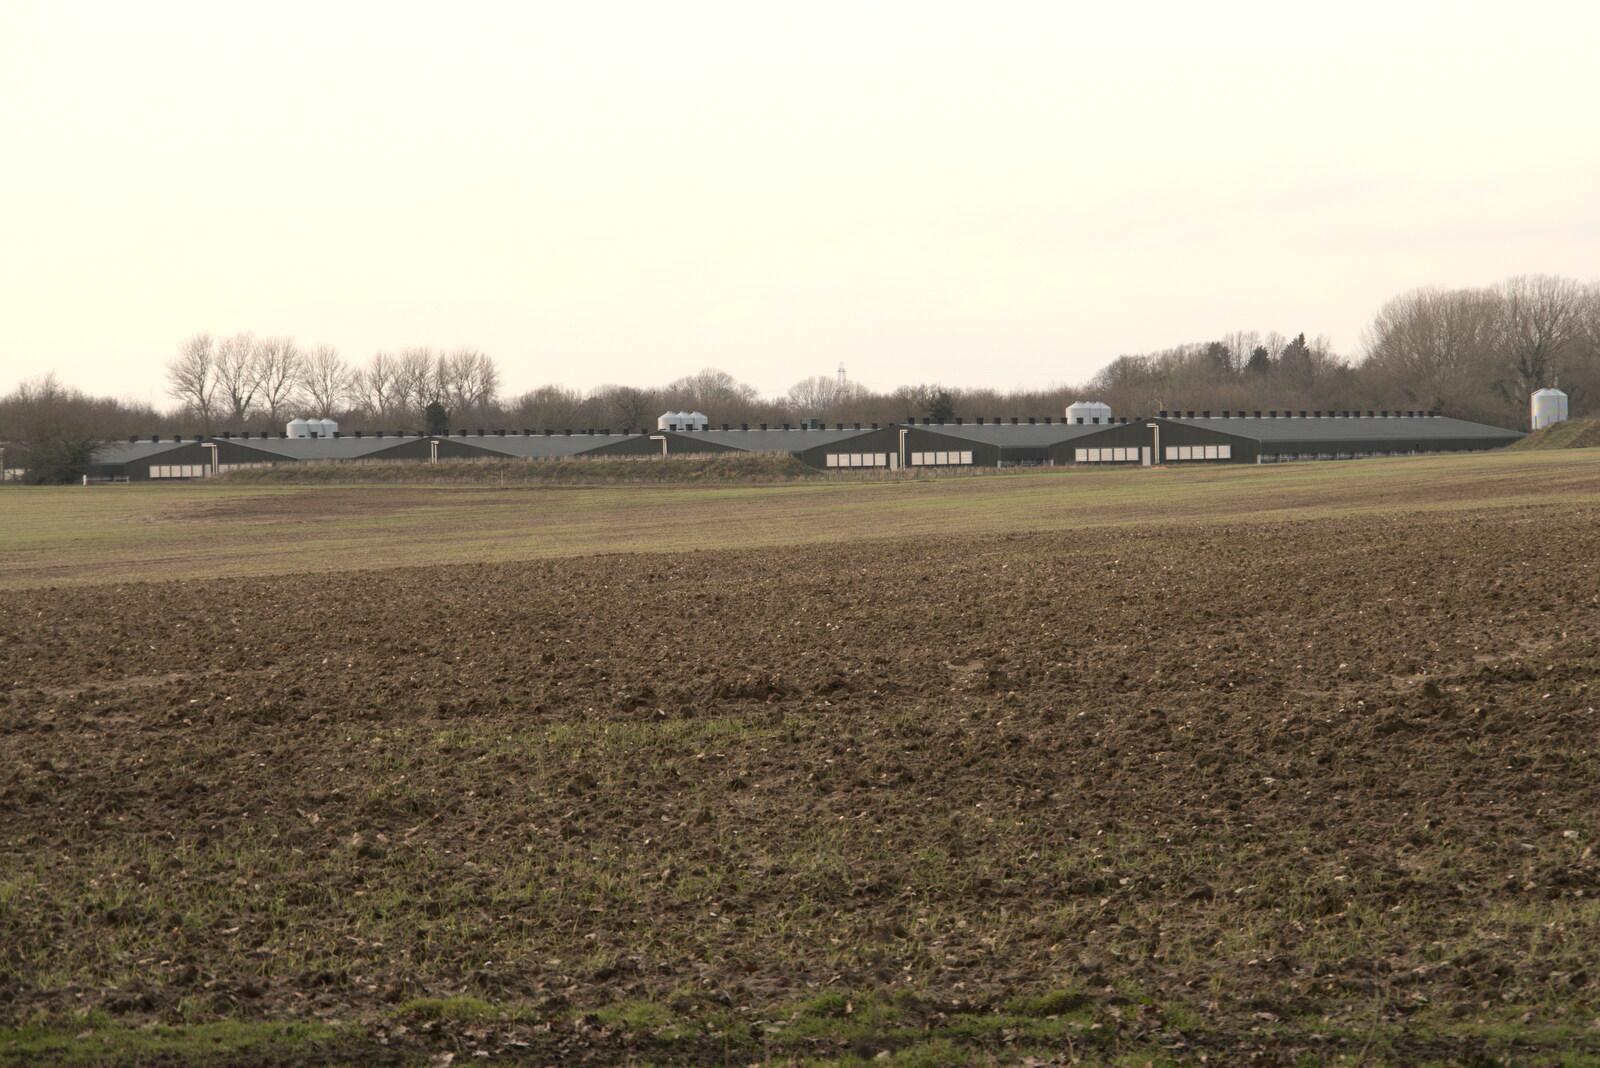 West's massive new chicken farm from Fred's New Bike and an A140 Closure, Brome, Suffolk - 27th February 2021